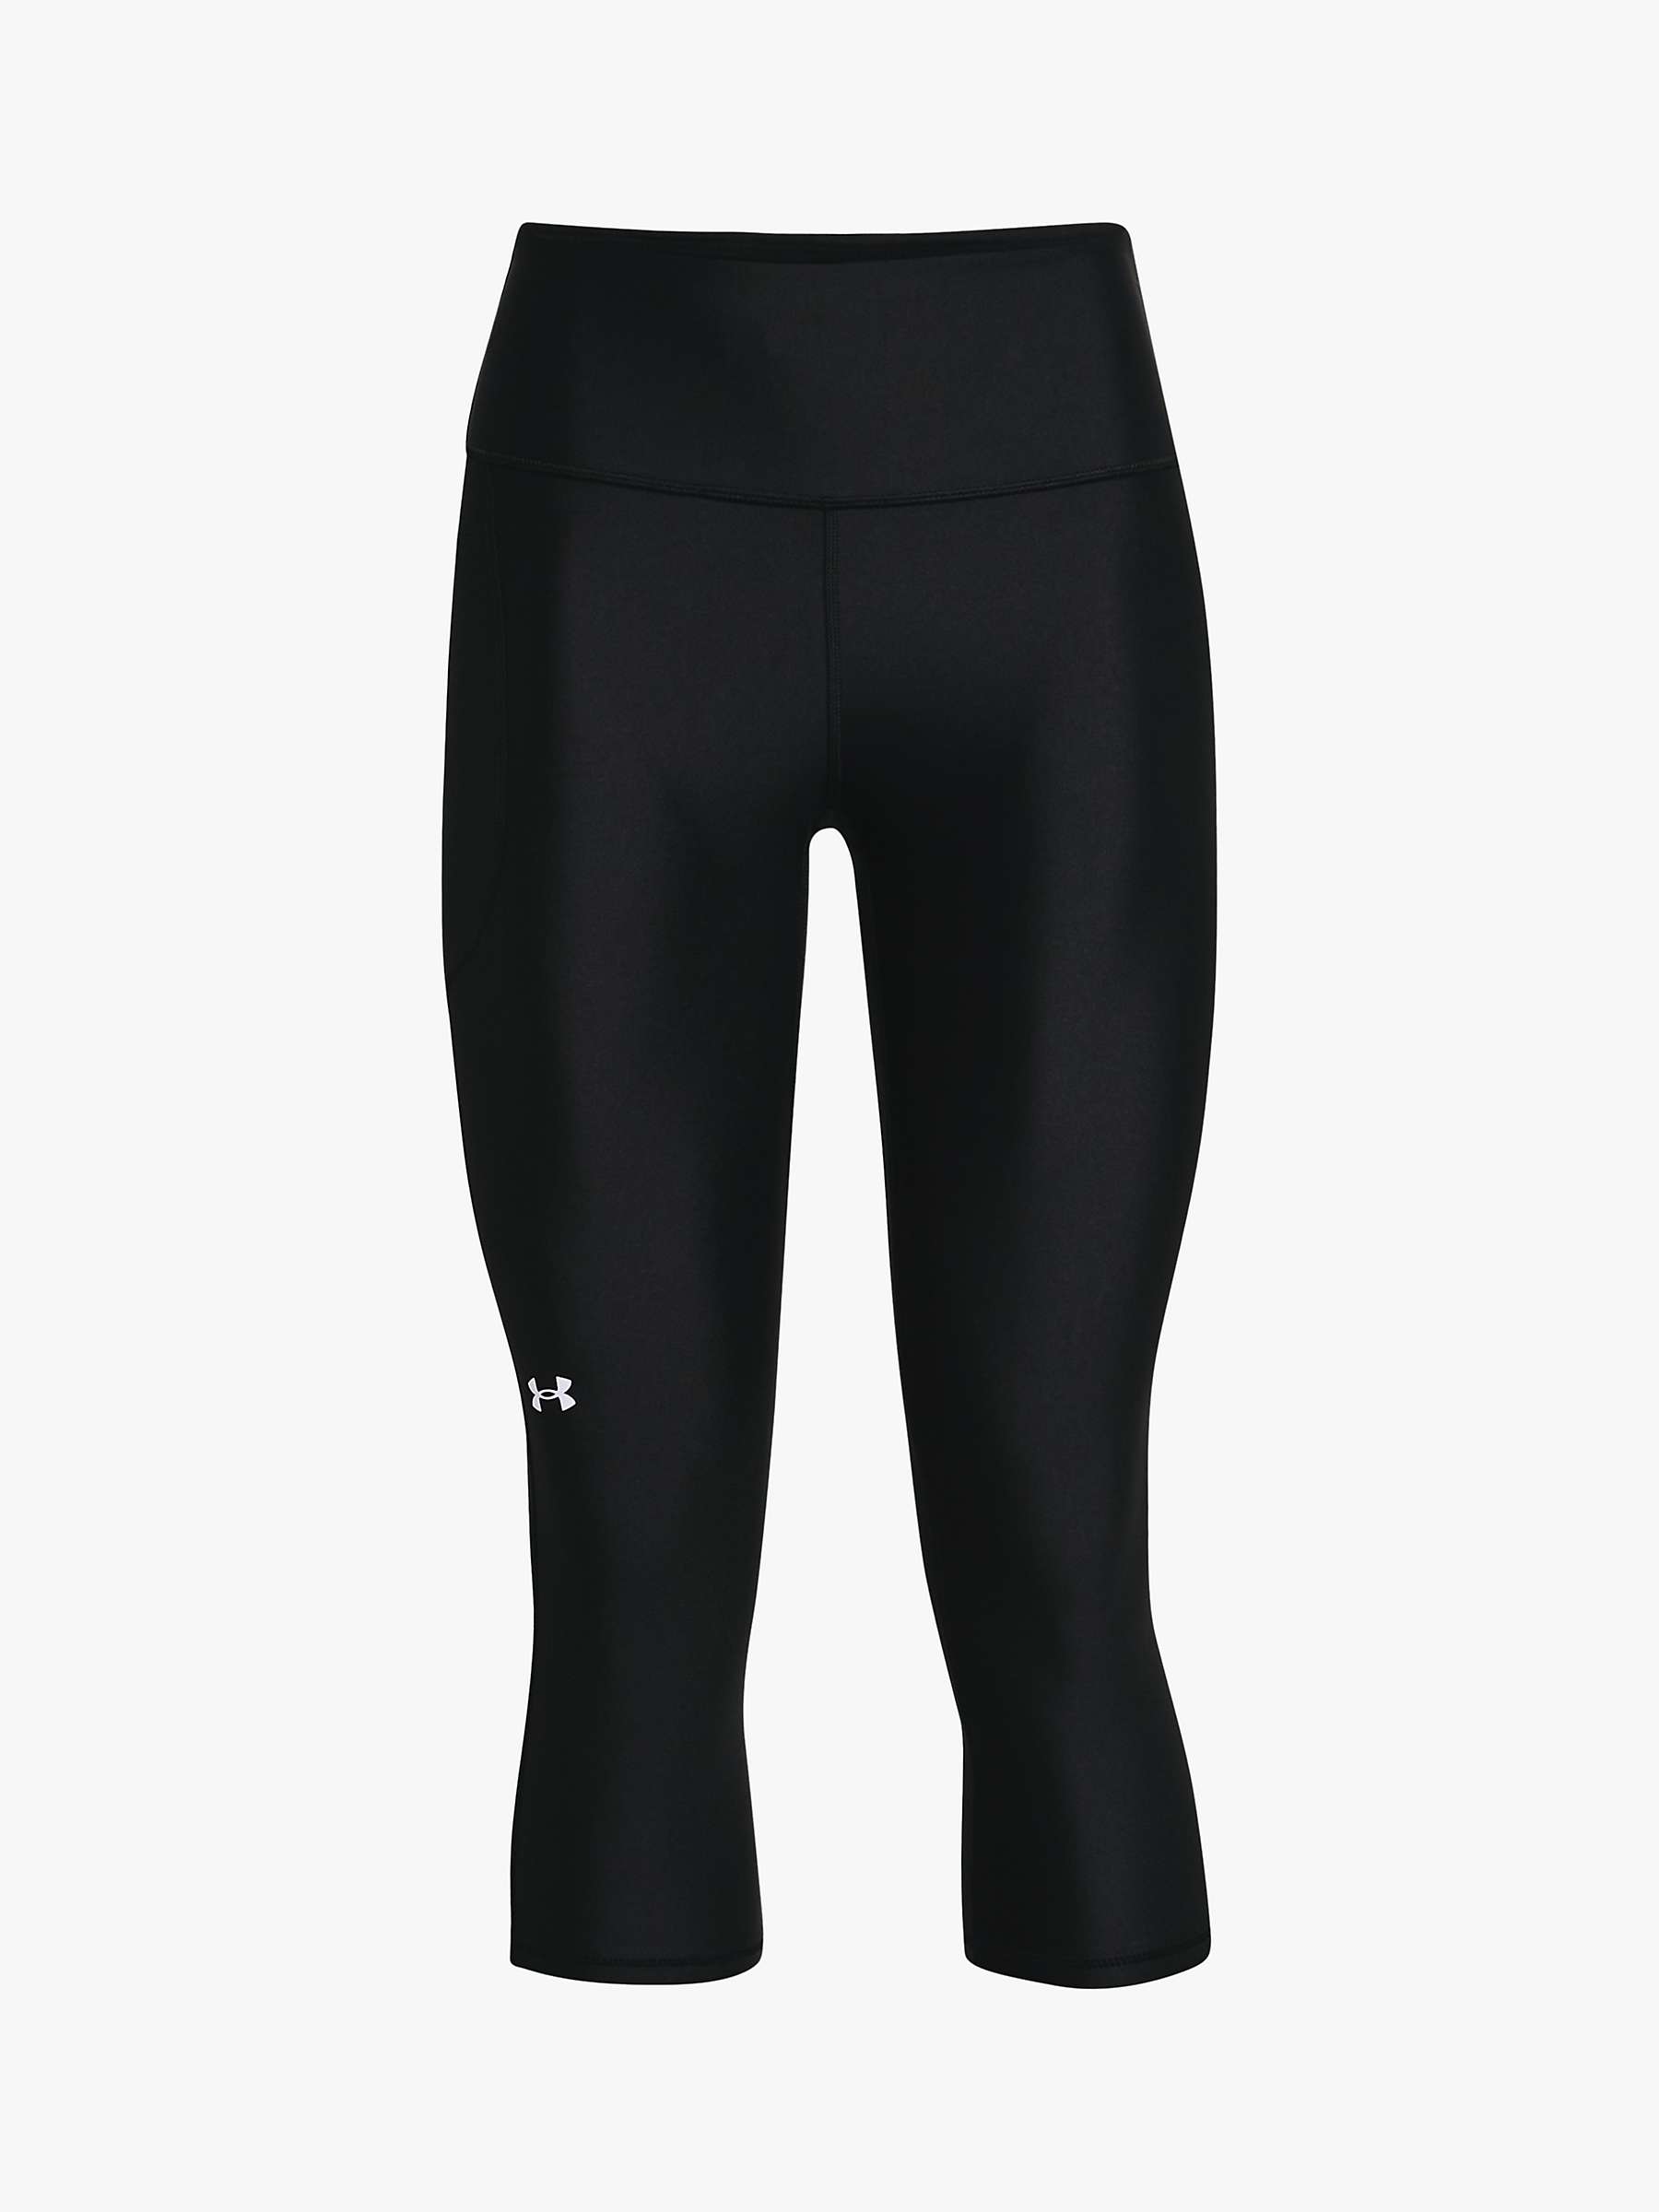 Buy Under Armour HeatGear Armour High Waisted Cropped Leggings, Black Online at johnlewis.com